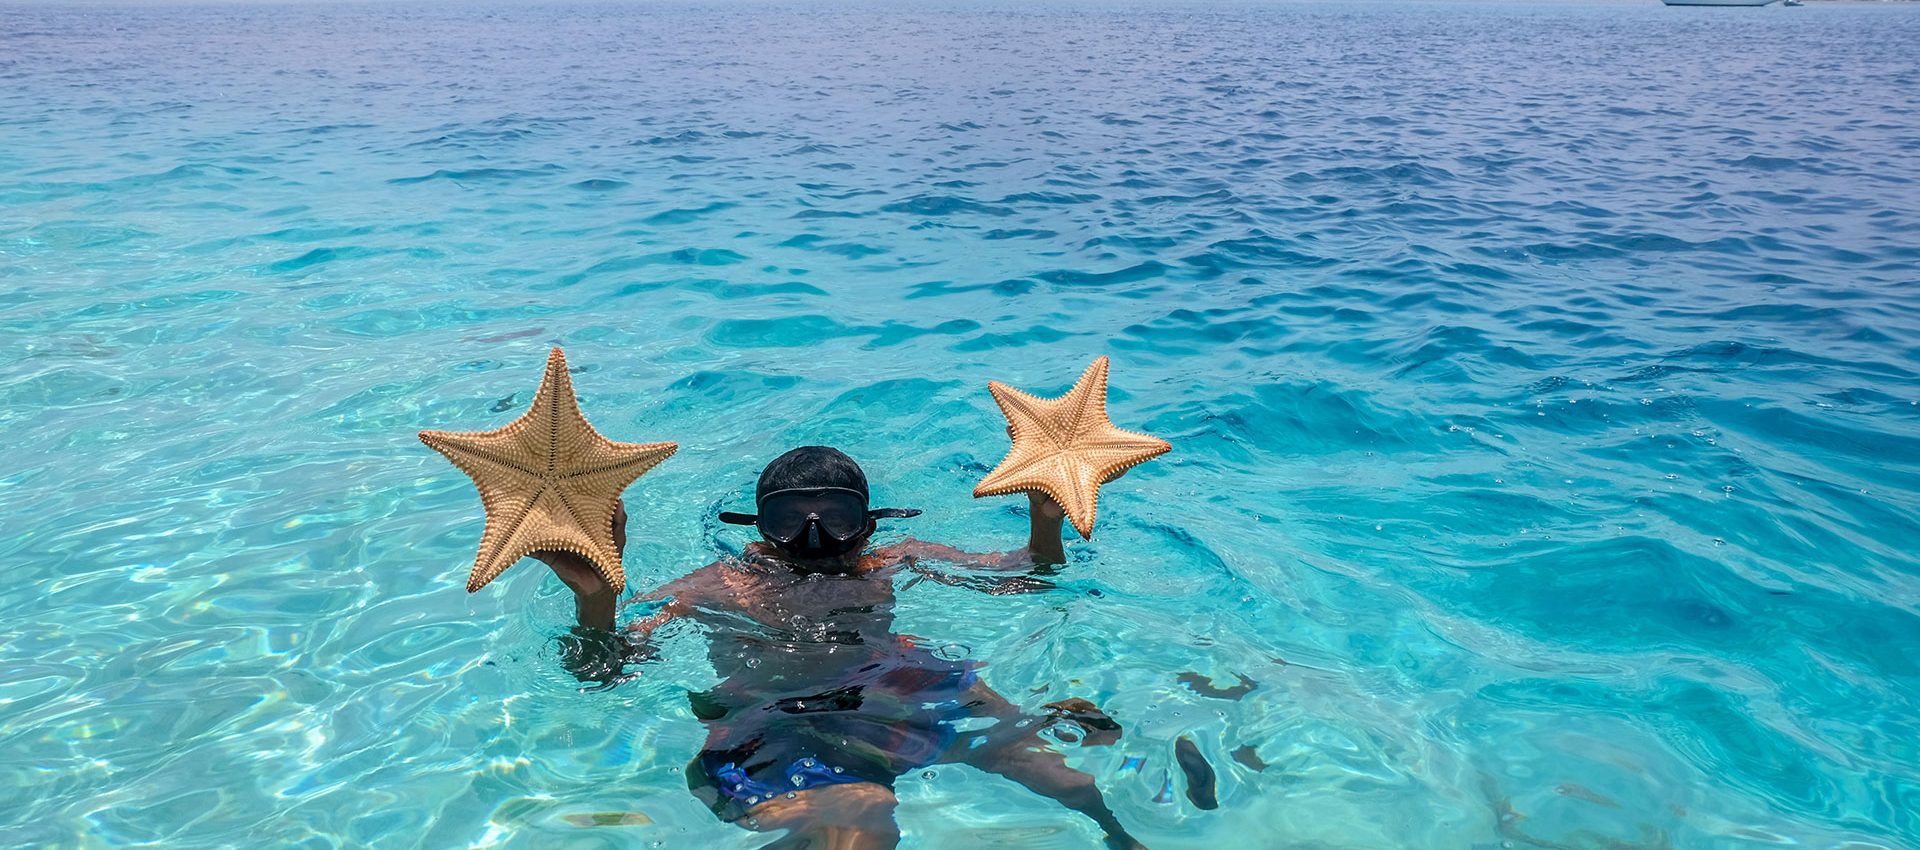 Starfish everywhere, you just need to dive down and choose one.